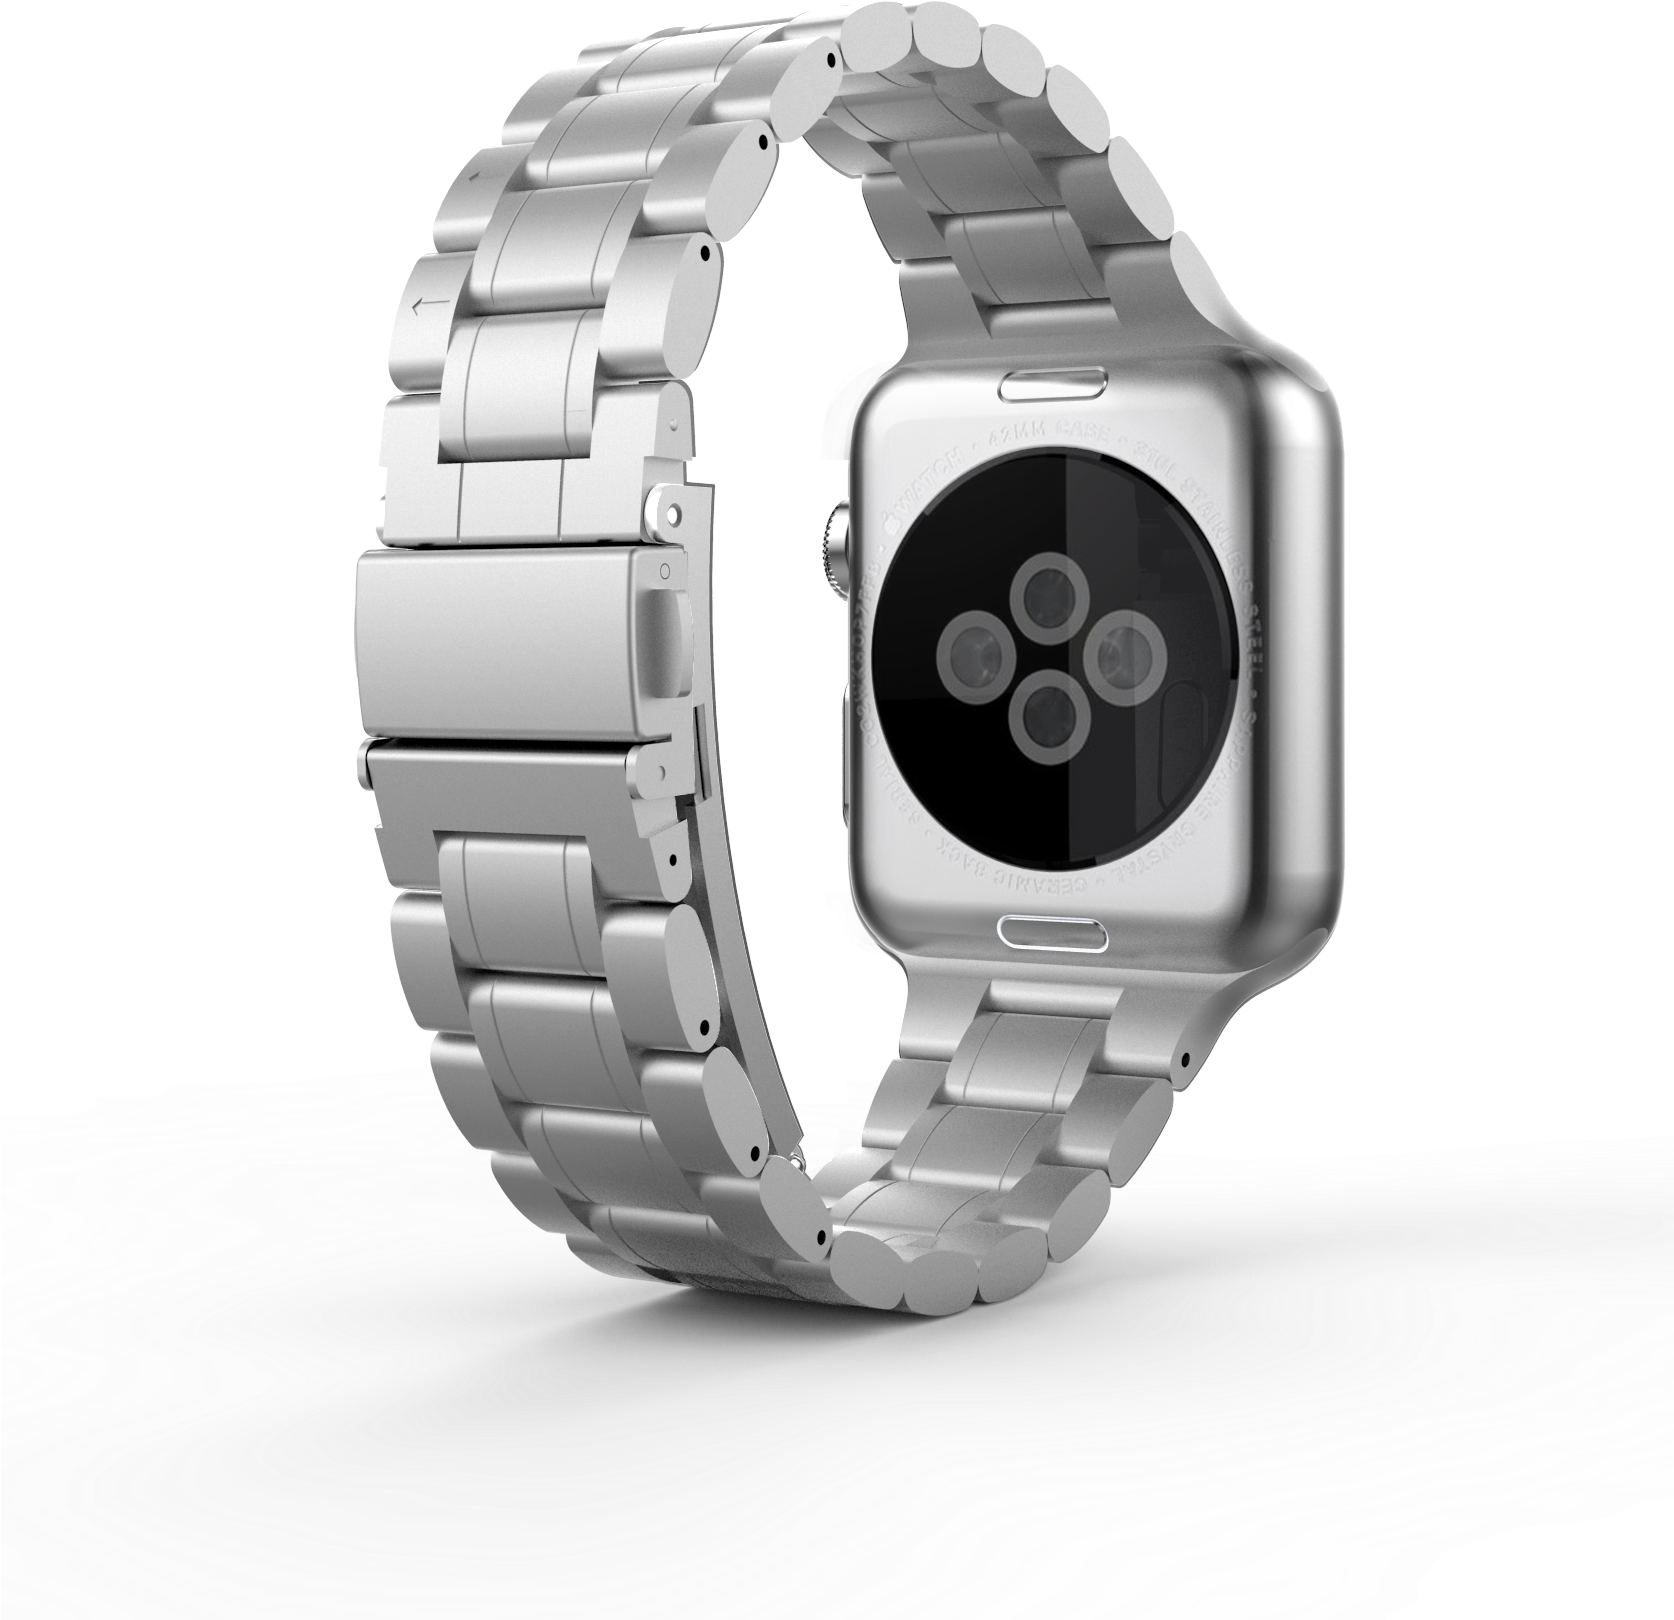 Svg Free Stock Must Have Gadgets For Apple Products - Apple Watch Stainless Steel 316l (1673x1879), Png Download